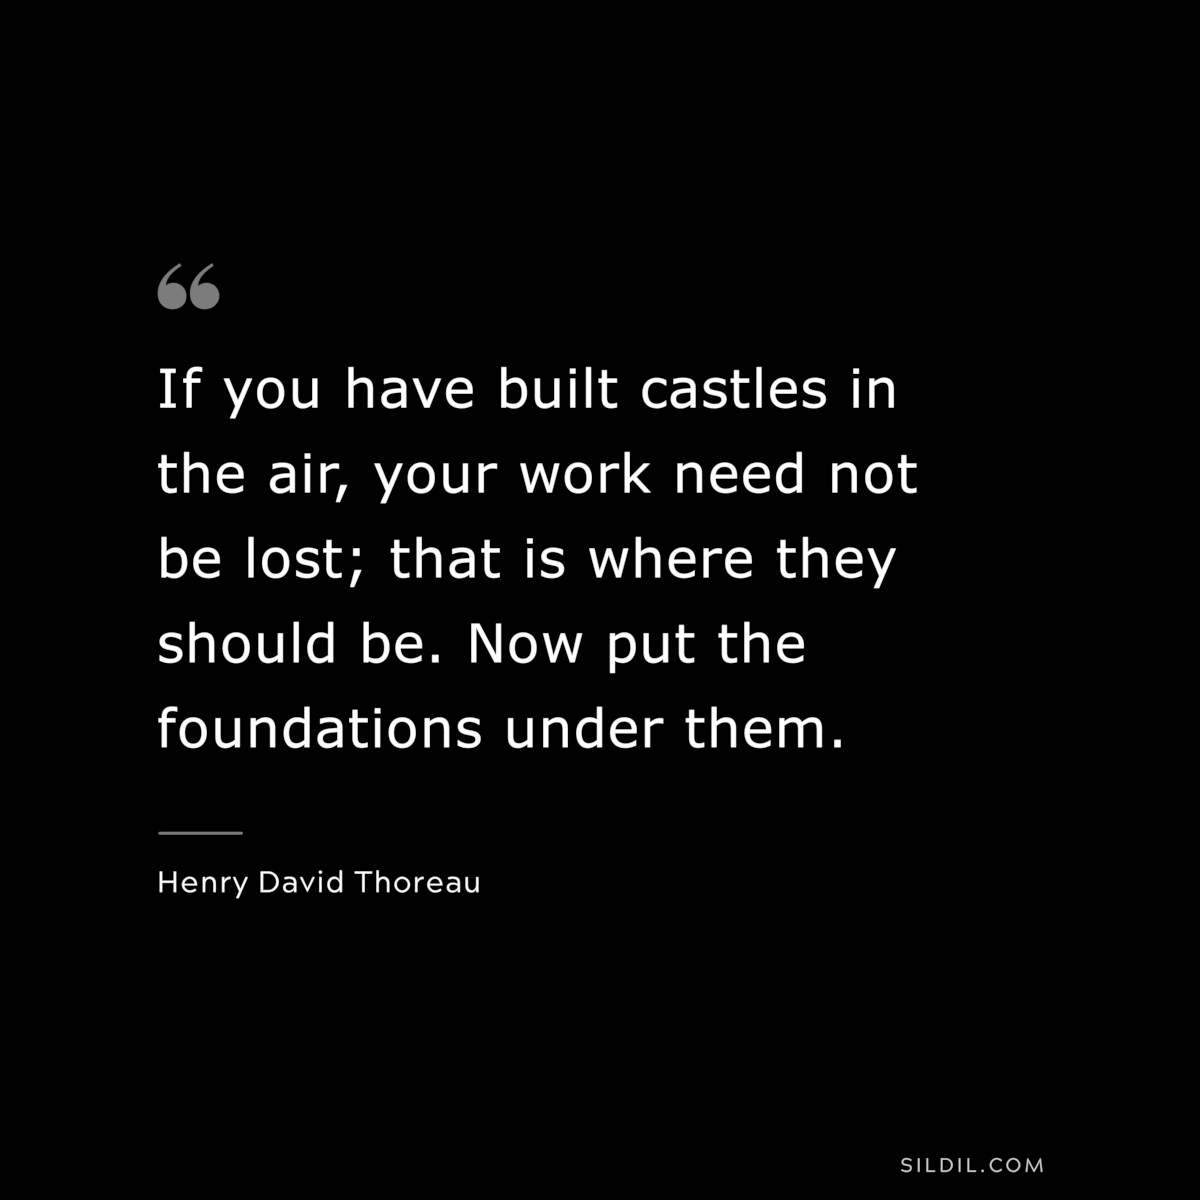 If you have built castles in the air, your work need not be lost; that is where they should be. Now put the foundations under them. — Henry David Thoreau